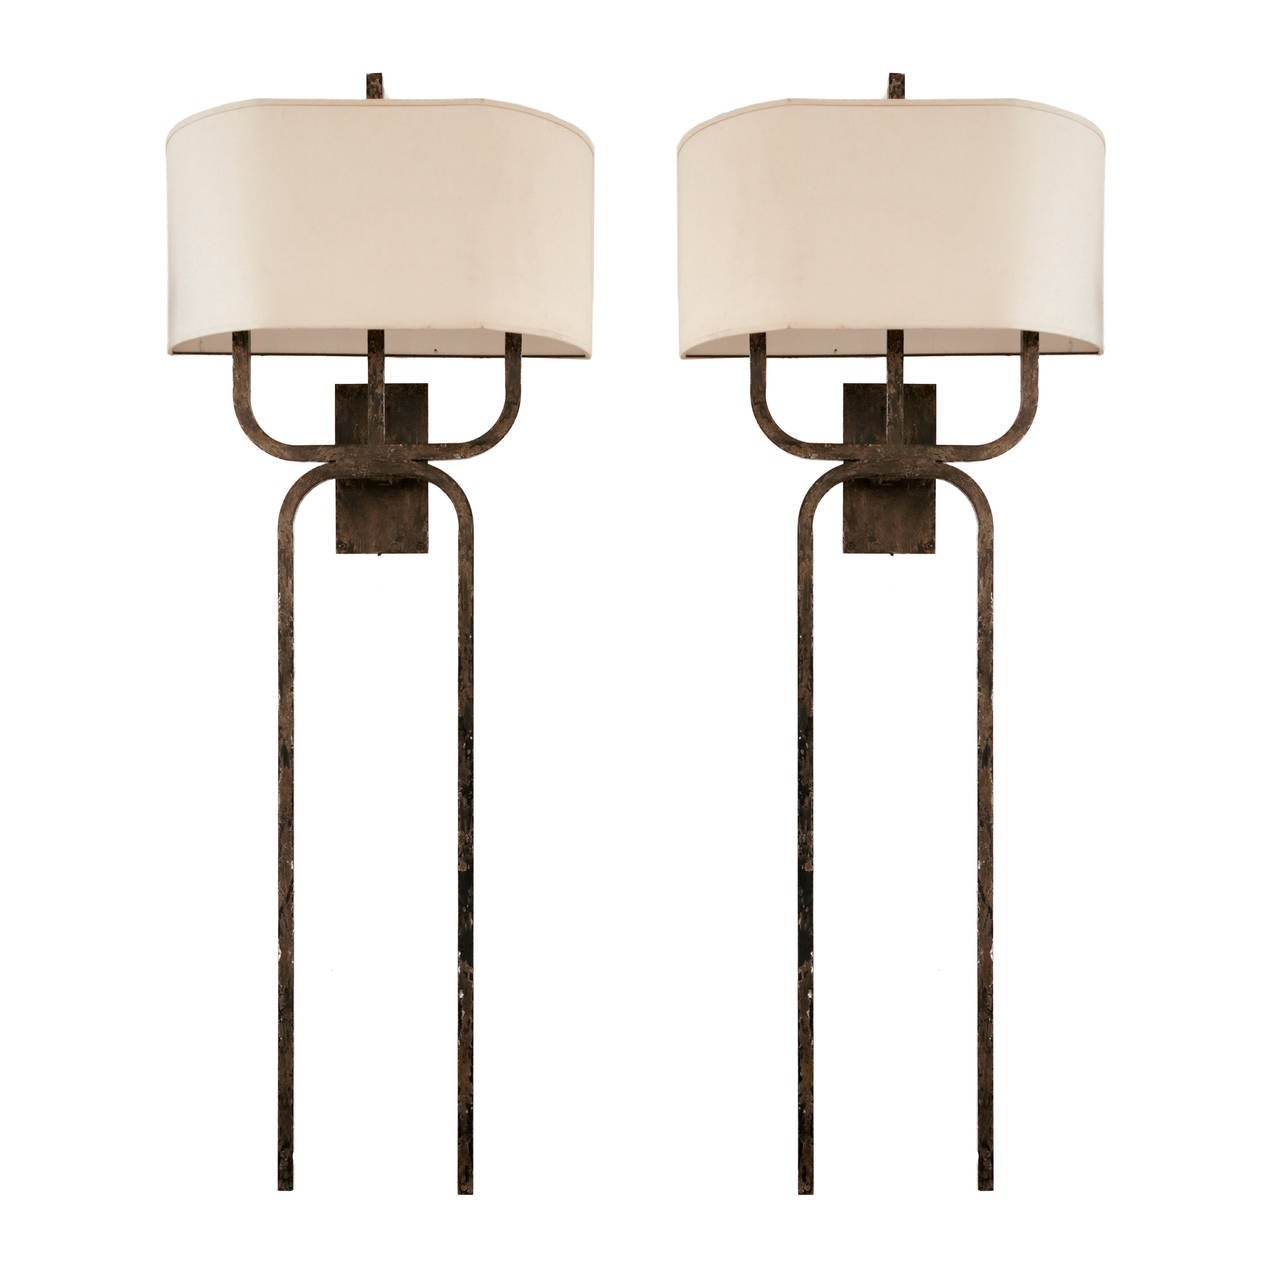 Mid-20th Century Pair of Massive Five Foot Wall Sconces